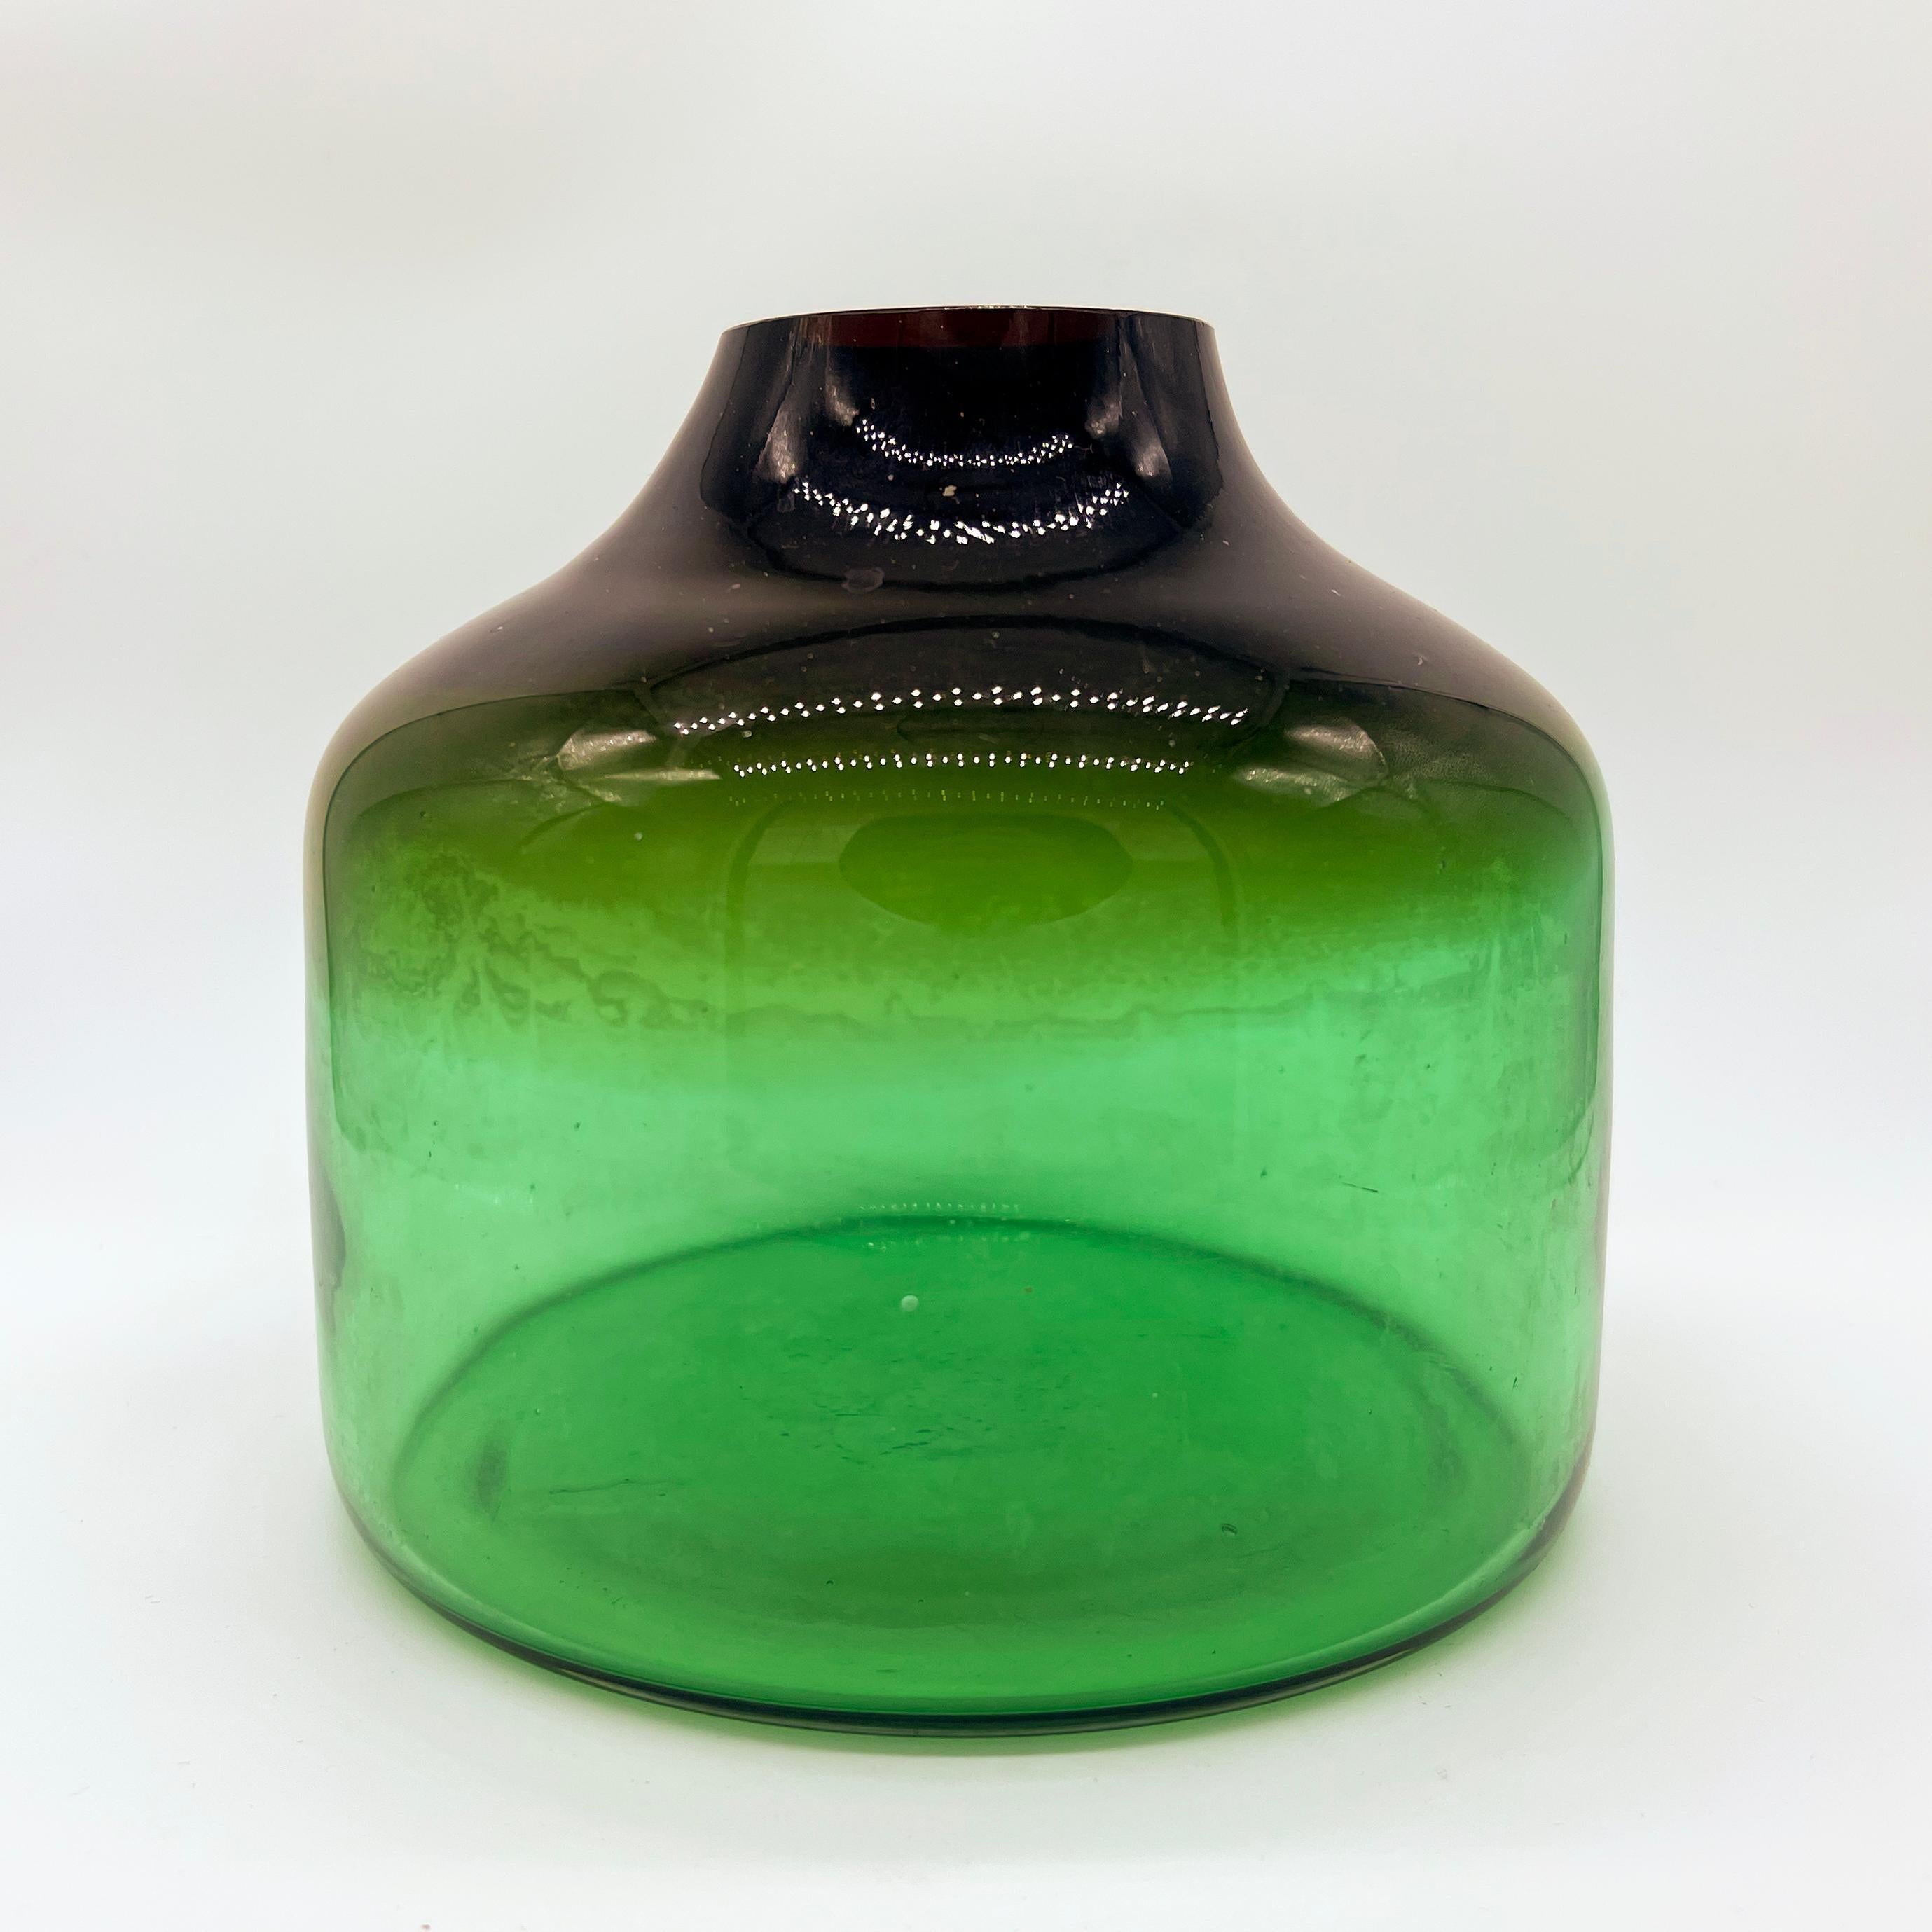 Vintage big and massive vase in thick Murano glass by Italian designer Vinicio Vianello, deep bottle green with a yellowish hue near the top. Dating back to the late Sixties / early Seventies, the vase is a stunning design piece and is still very